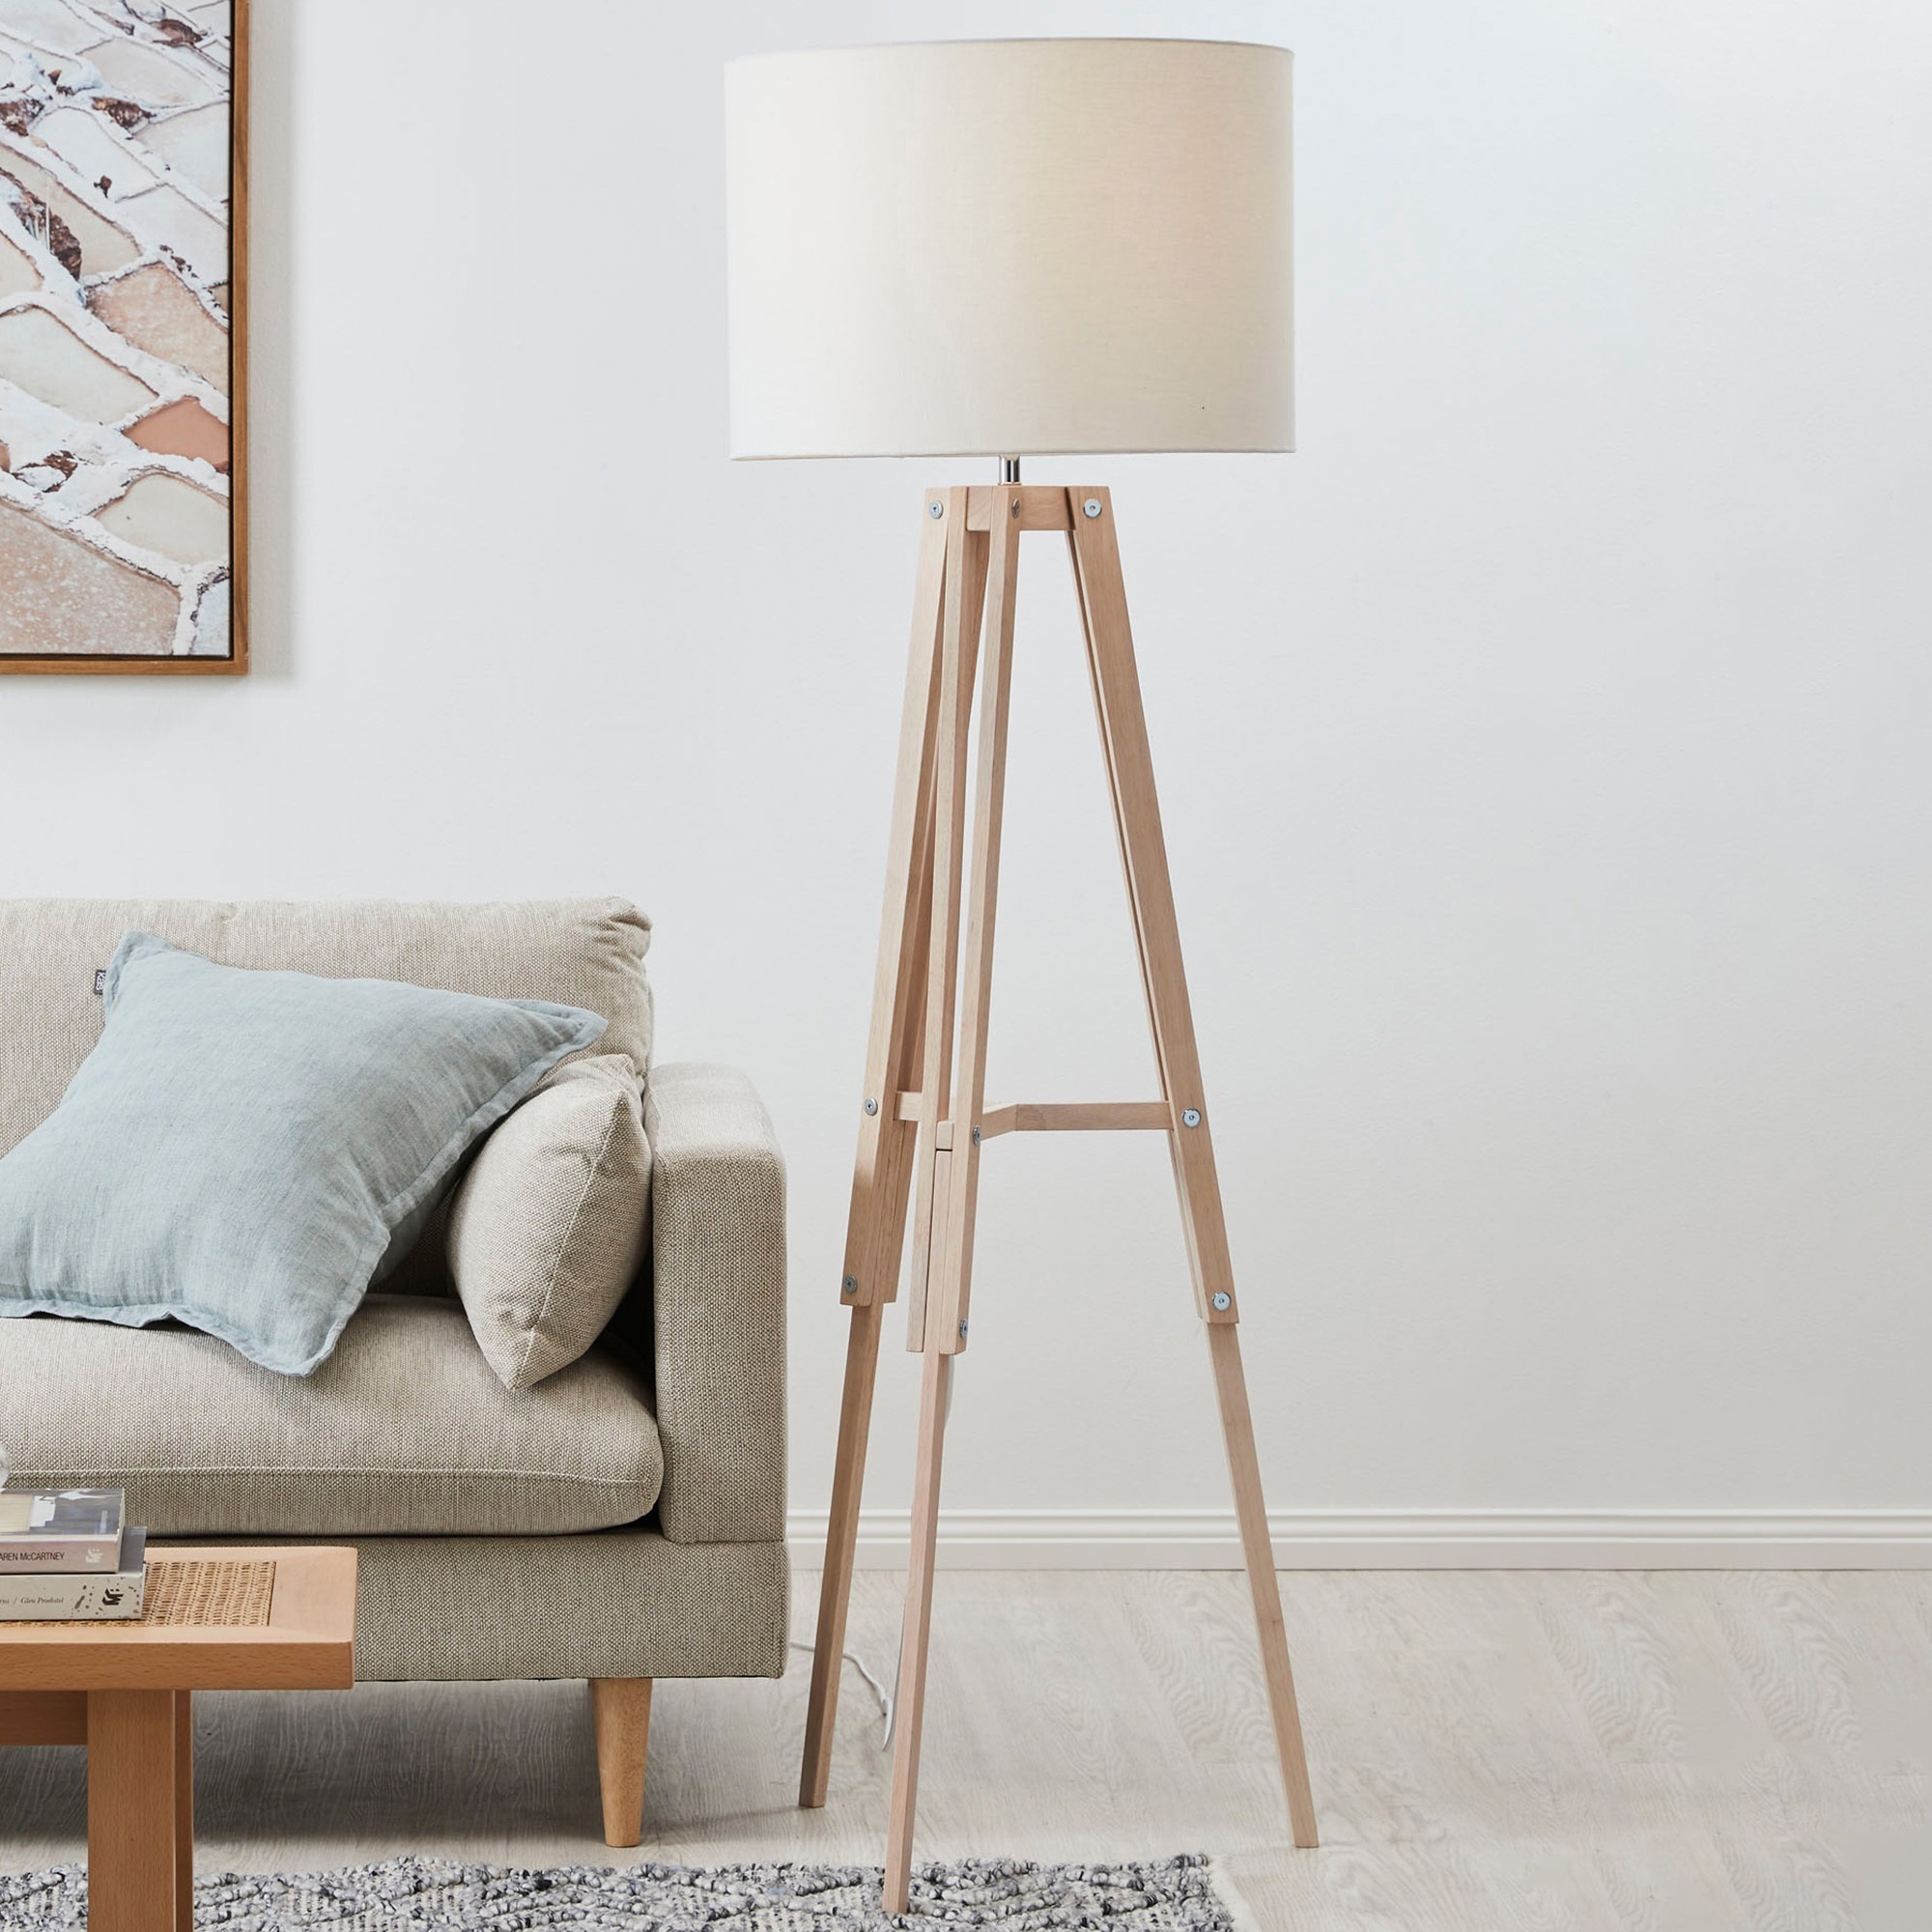 Temple Webster Benson Wooden Tripod, How To Make A Wooden Tripod Floor Lamp